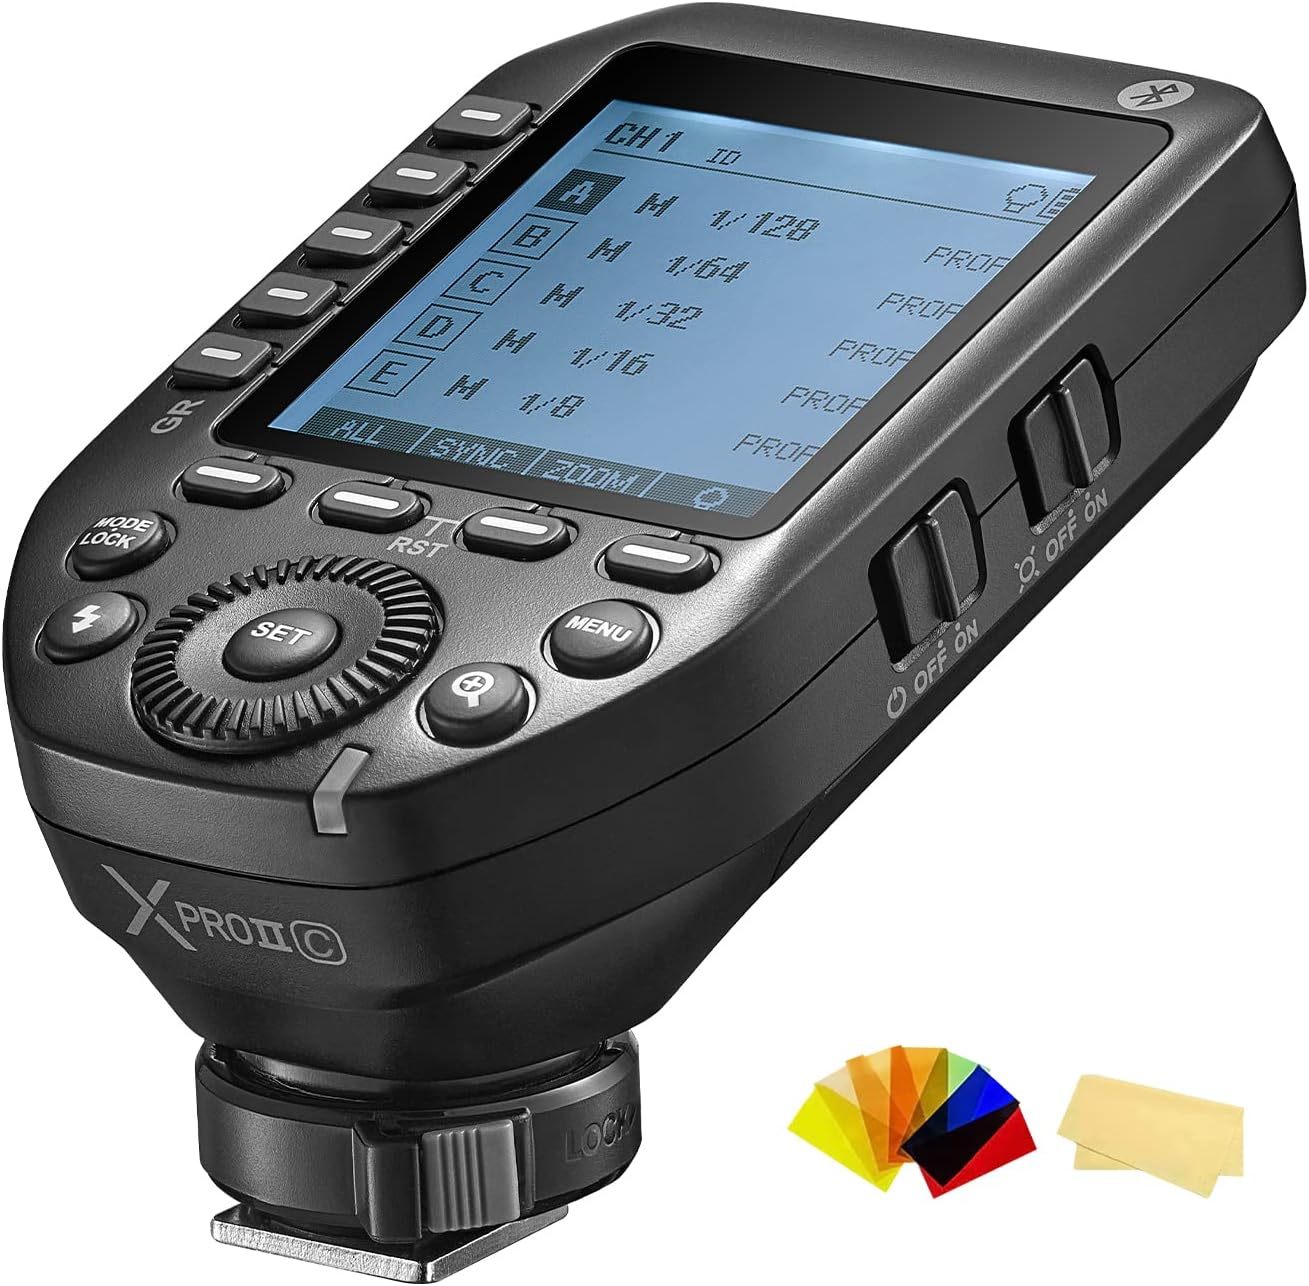 Godox Xproii-C Ttl Wireless Flash Trigger Transmitter Compatible For Canon - $115.97